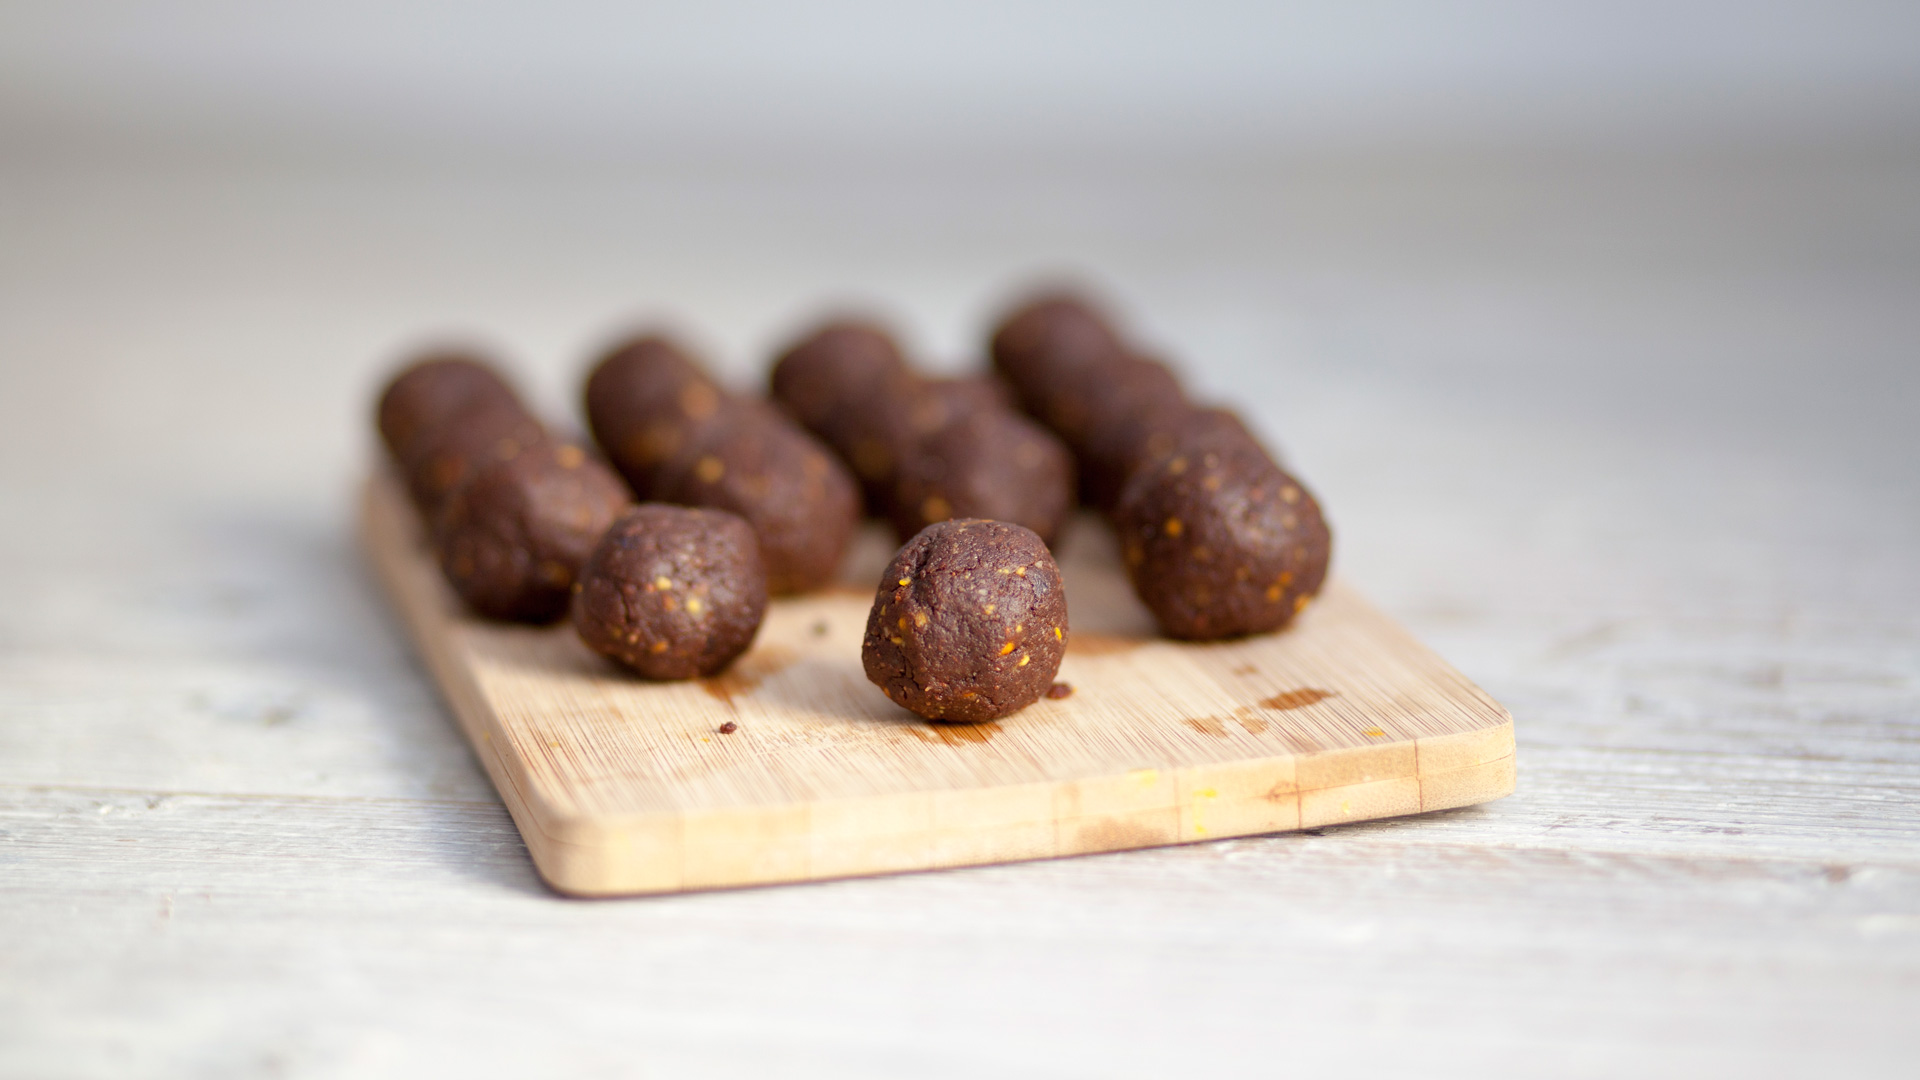 Linsey Boersbroek's delicious and healthy recipe for Superfood Date and Almond Balls with Bee Pollen